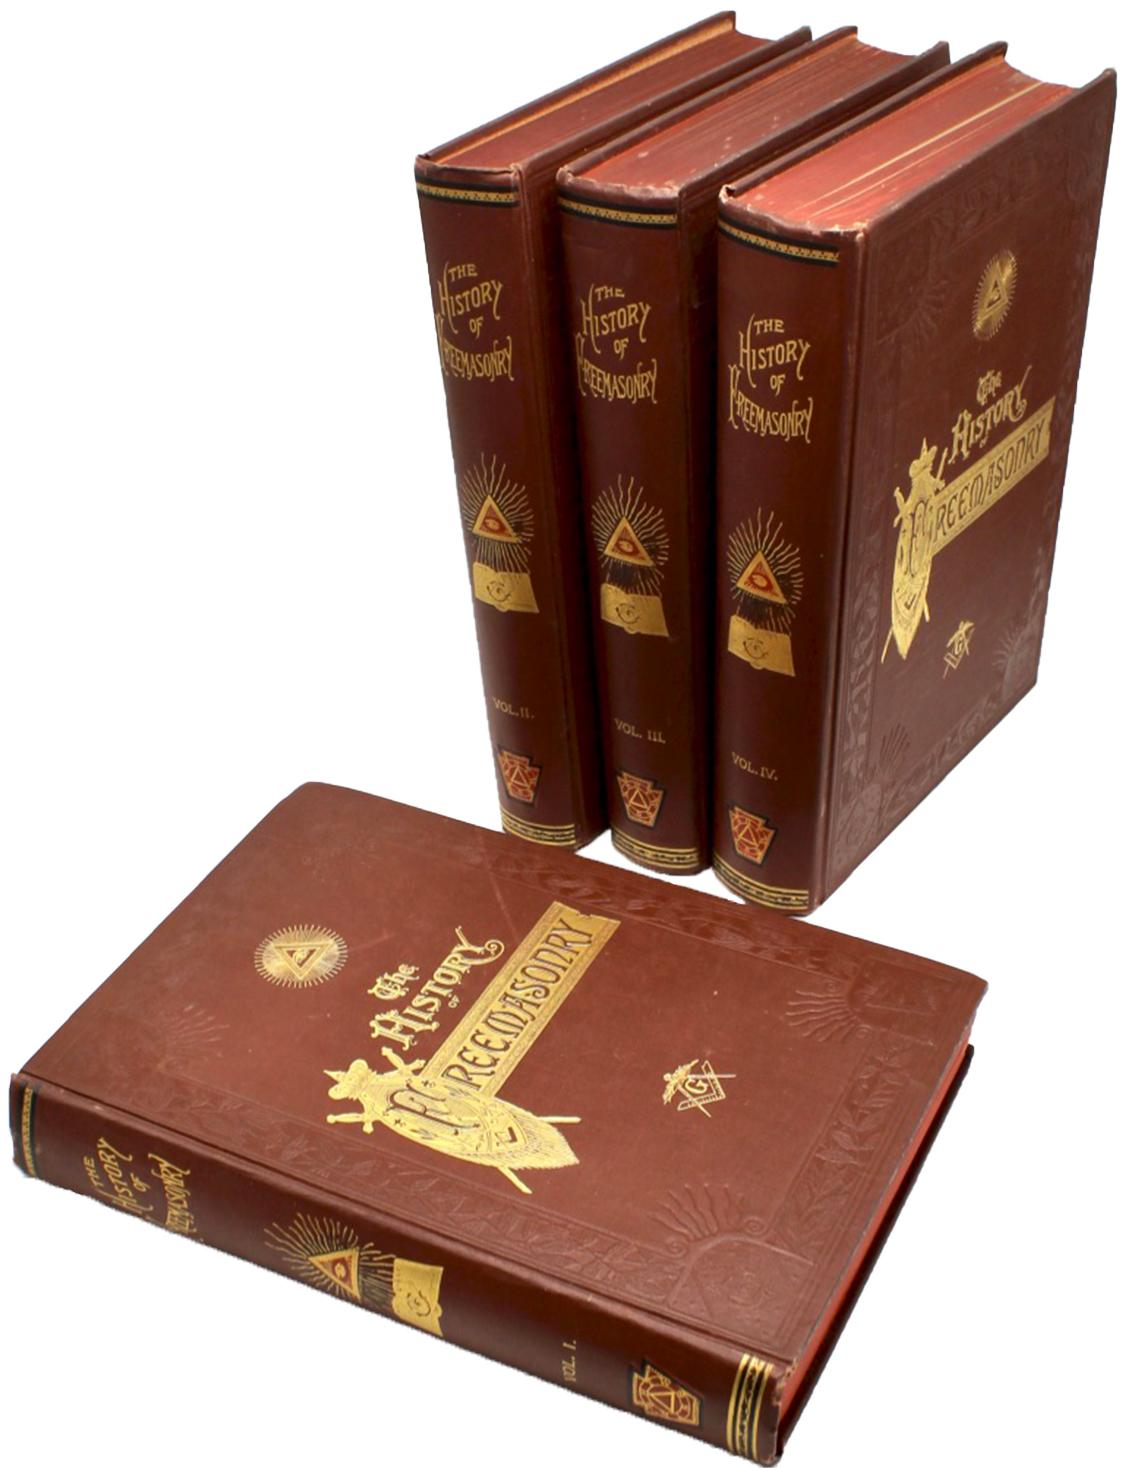 Gould, Robert Freke. The History of Freemasonry, Derived from Official Sources throughout the World, Its Antiquities, Symbols, Constitutions, Customs, etc. Philadelphia: The John C. Yorston Publishing Co., 1898. Four volume set. Bound in maroon